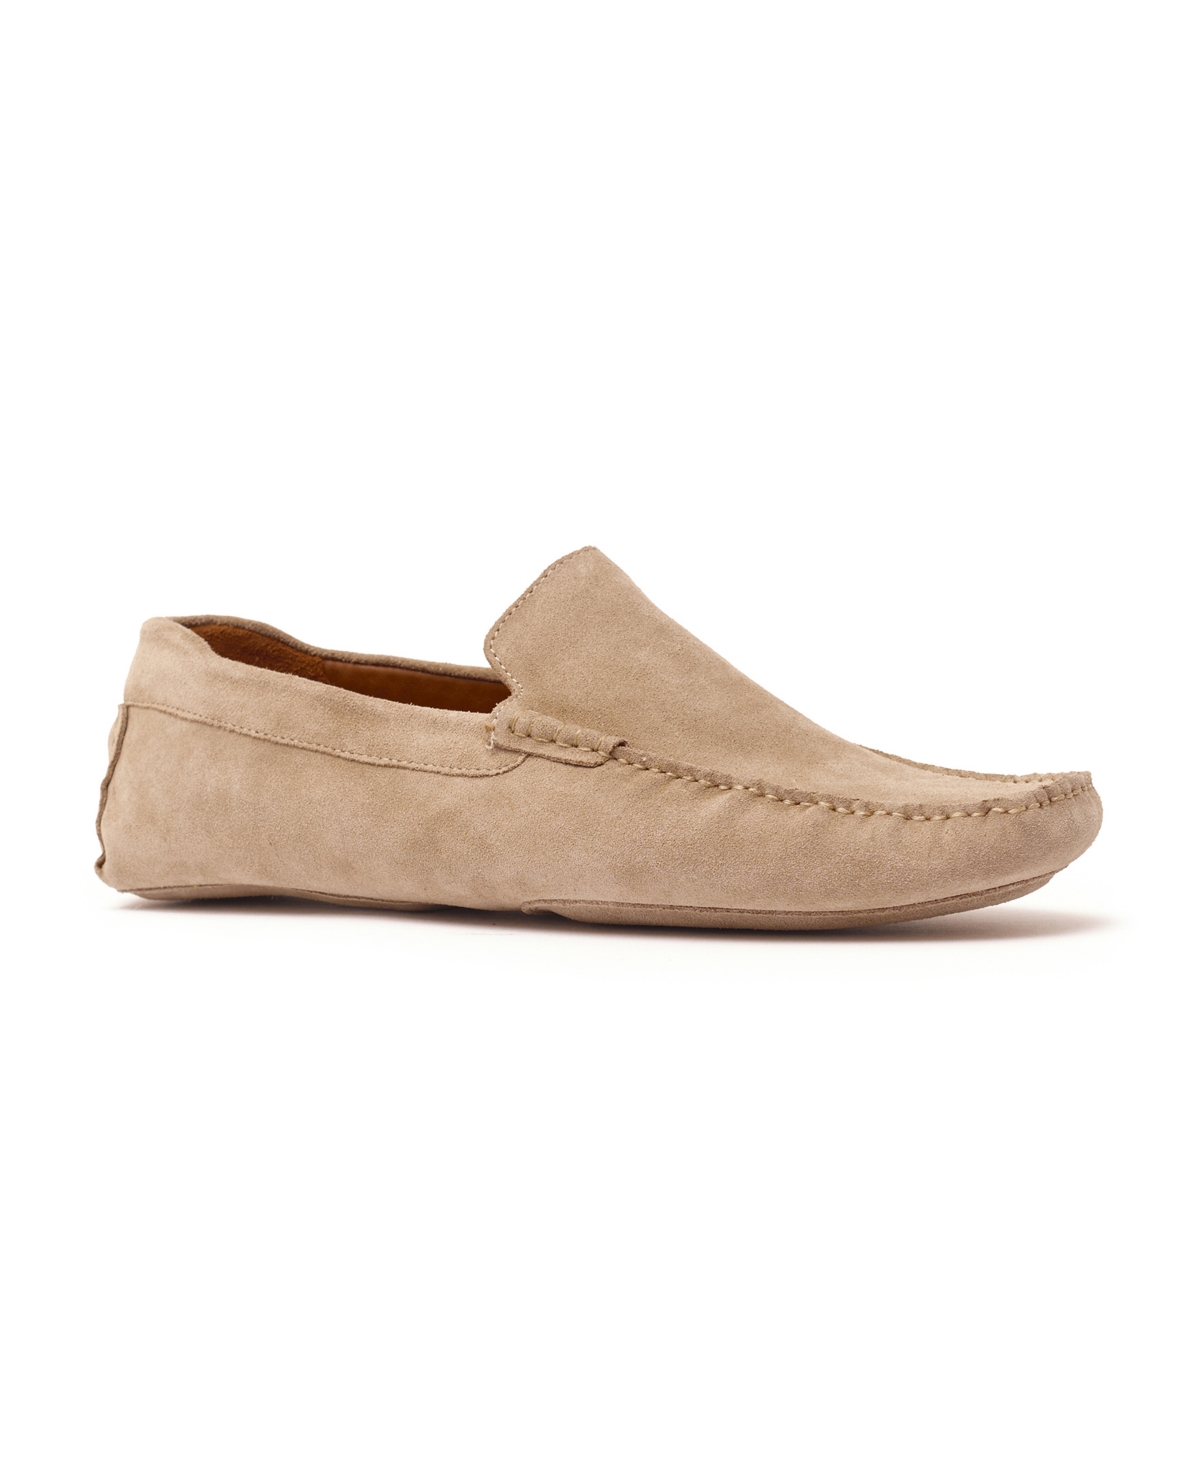 Anthony Veer Men's William House All Suede For Home Loafers Men's Shoes In Cappuccino